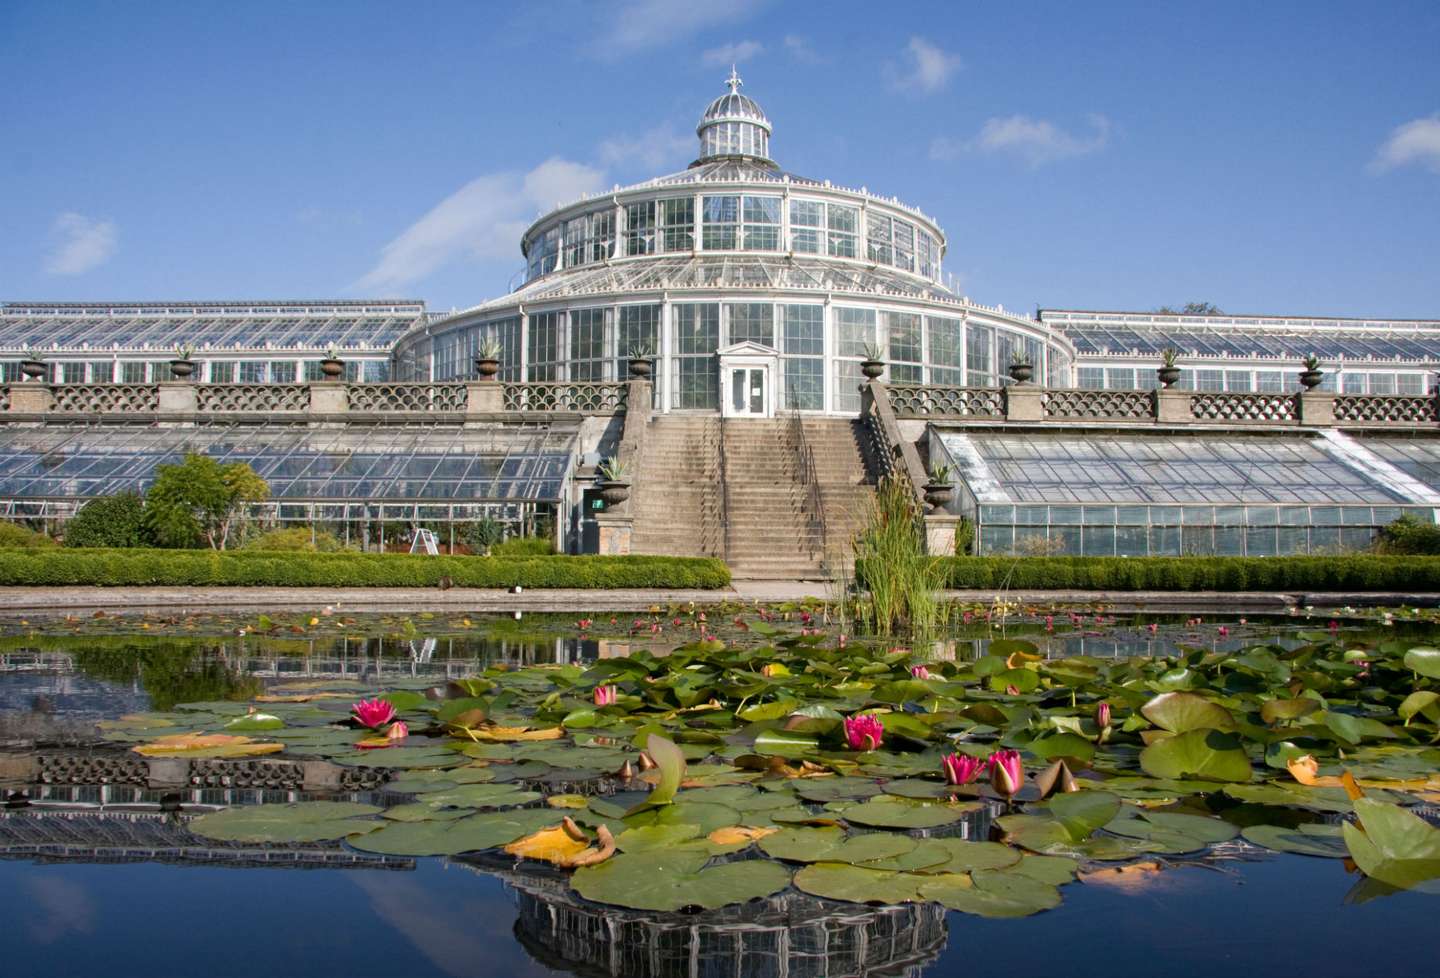 The Palm House in the Botanical Garden. Photo: Jens Astrup